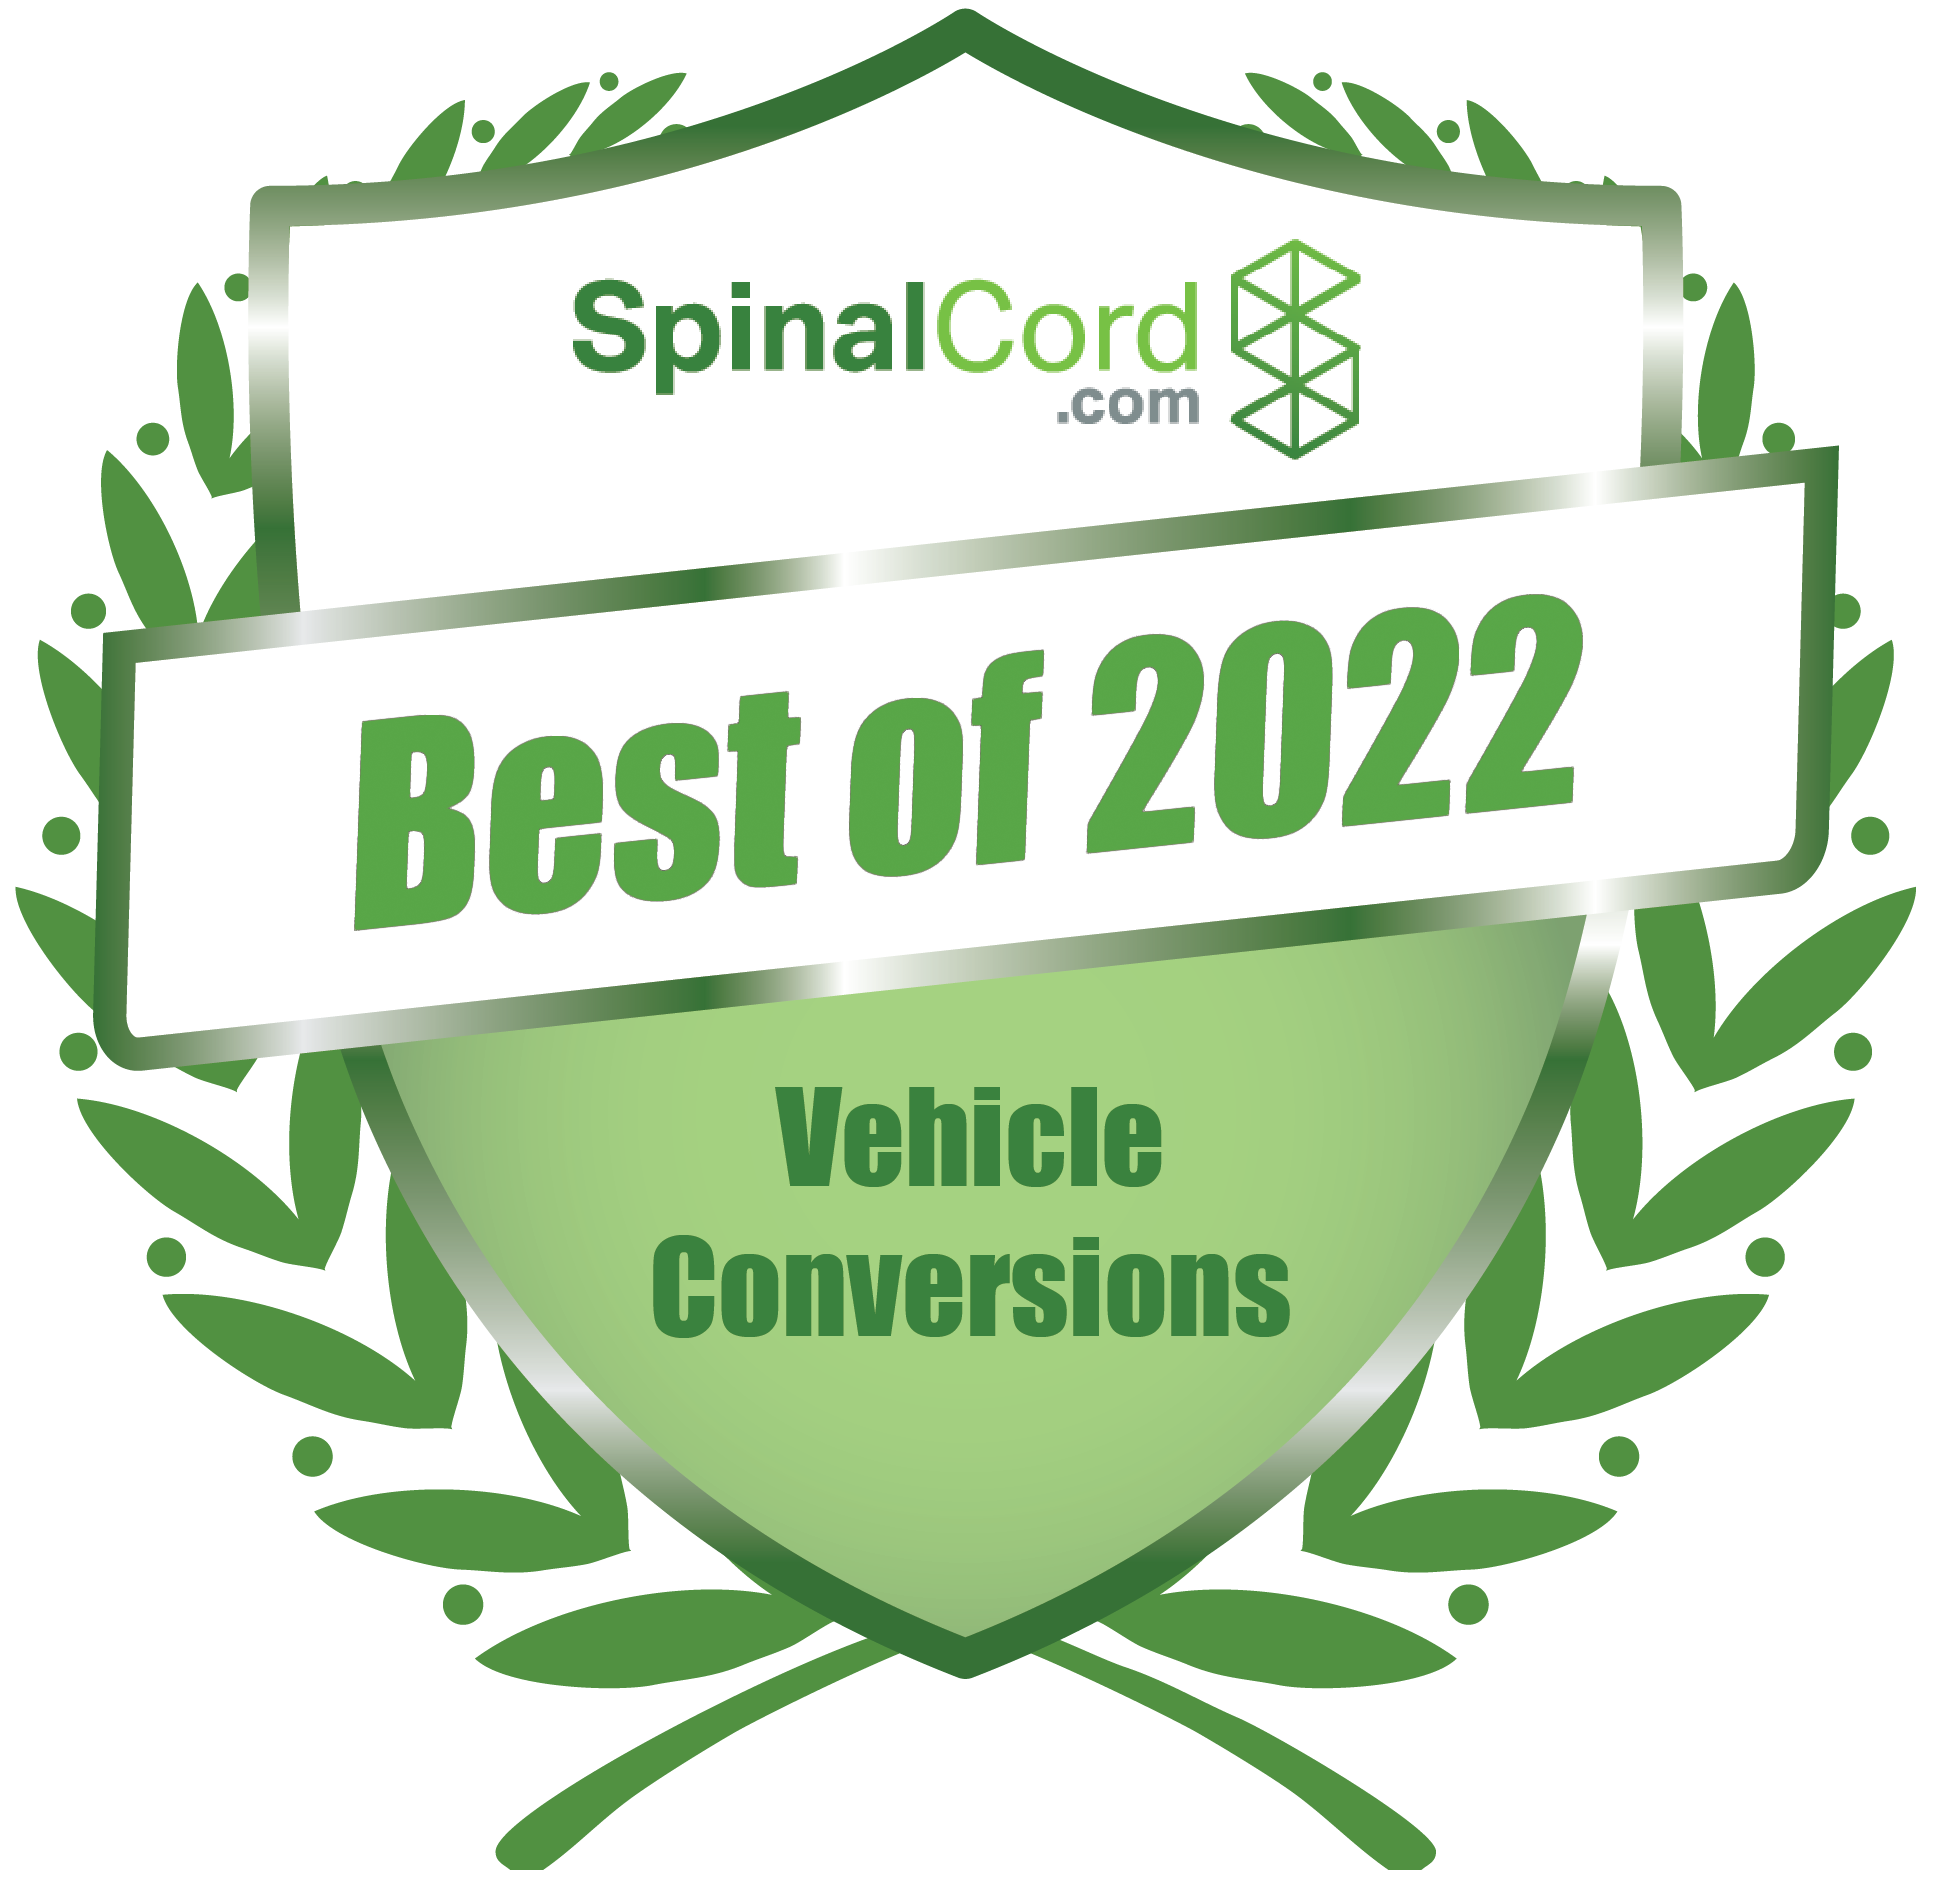 SpinalCord.com Best of Awards Vehicle Conversions